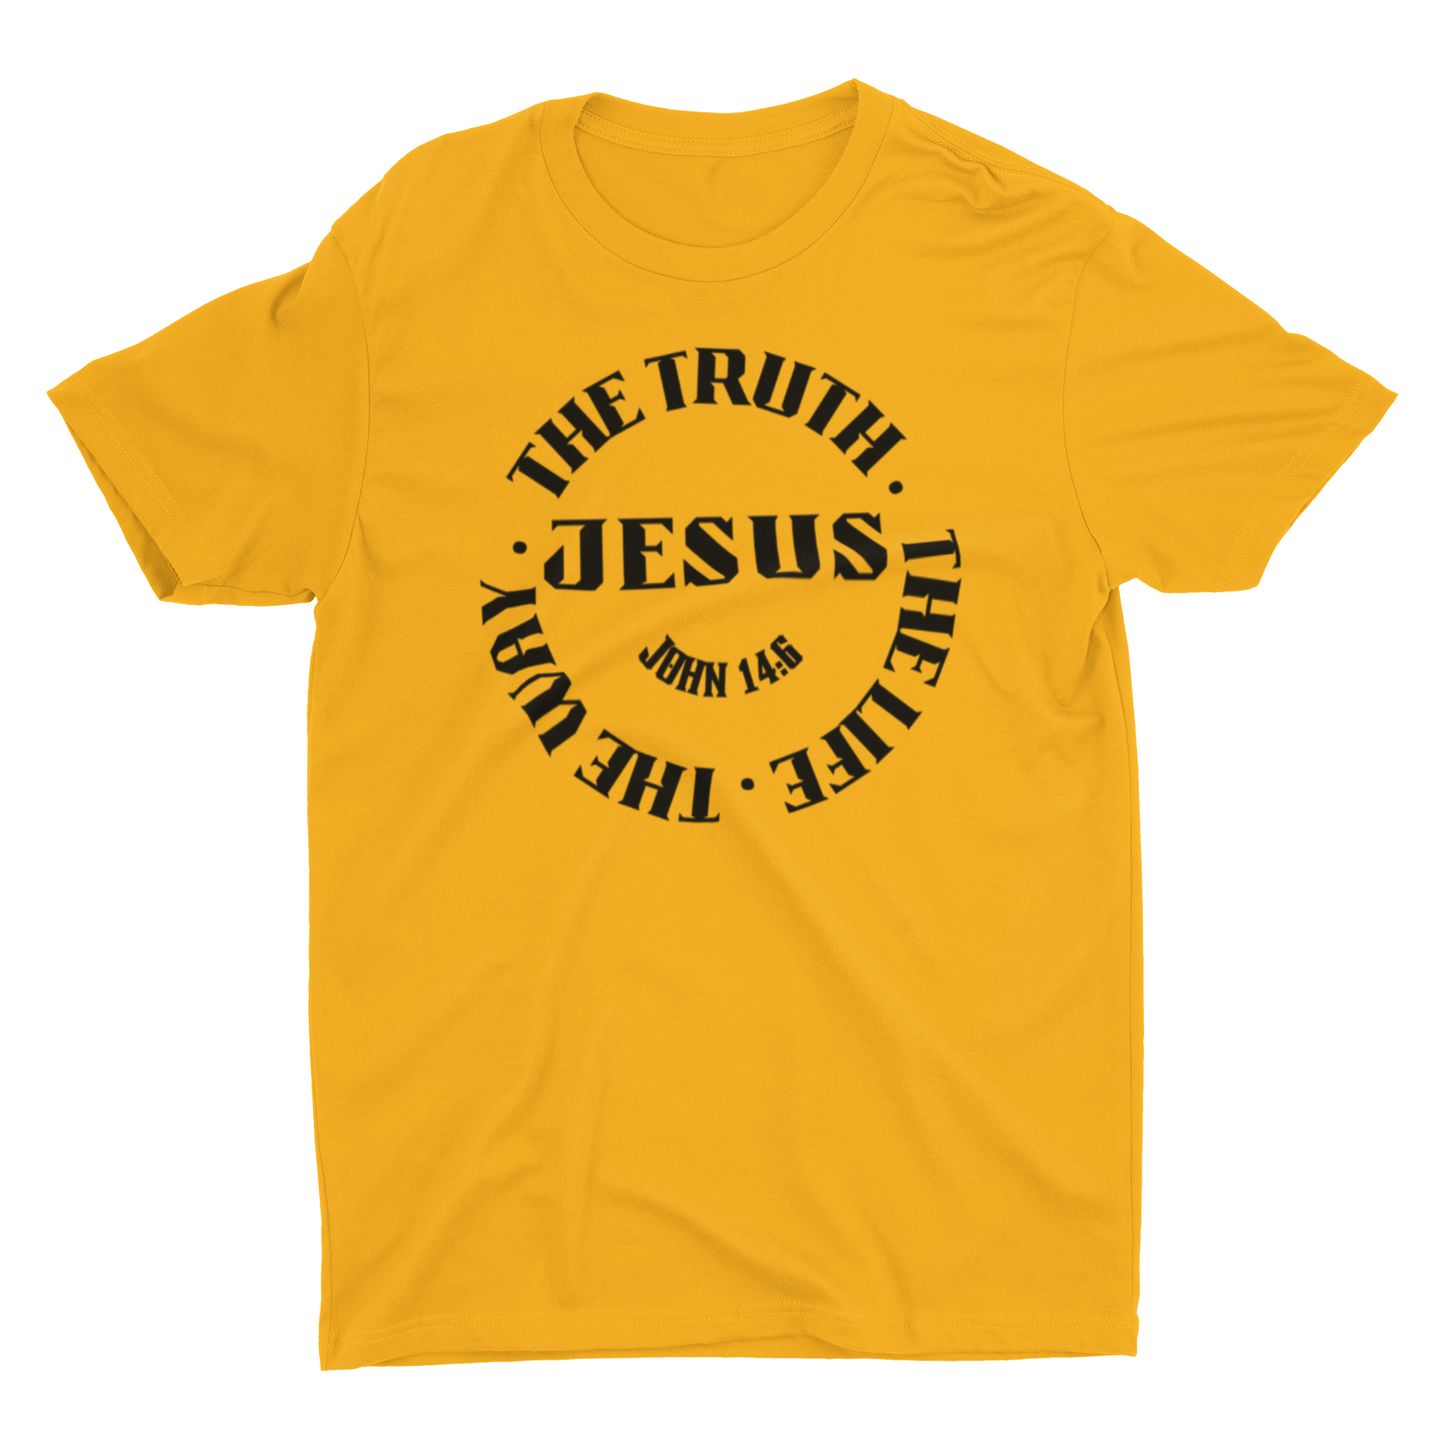 Jesus The Way The Truth and The Life t-shirt